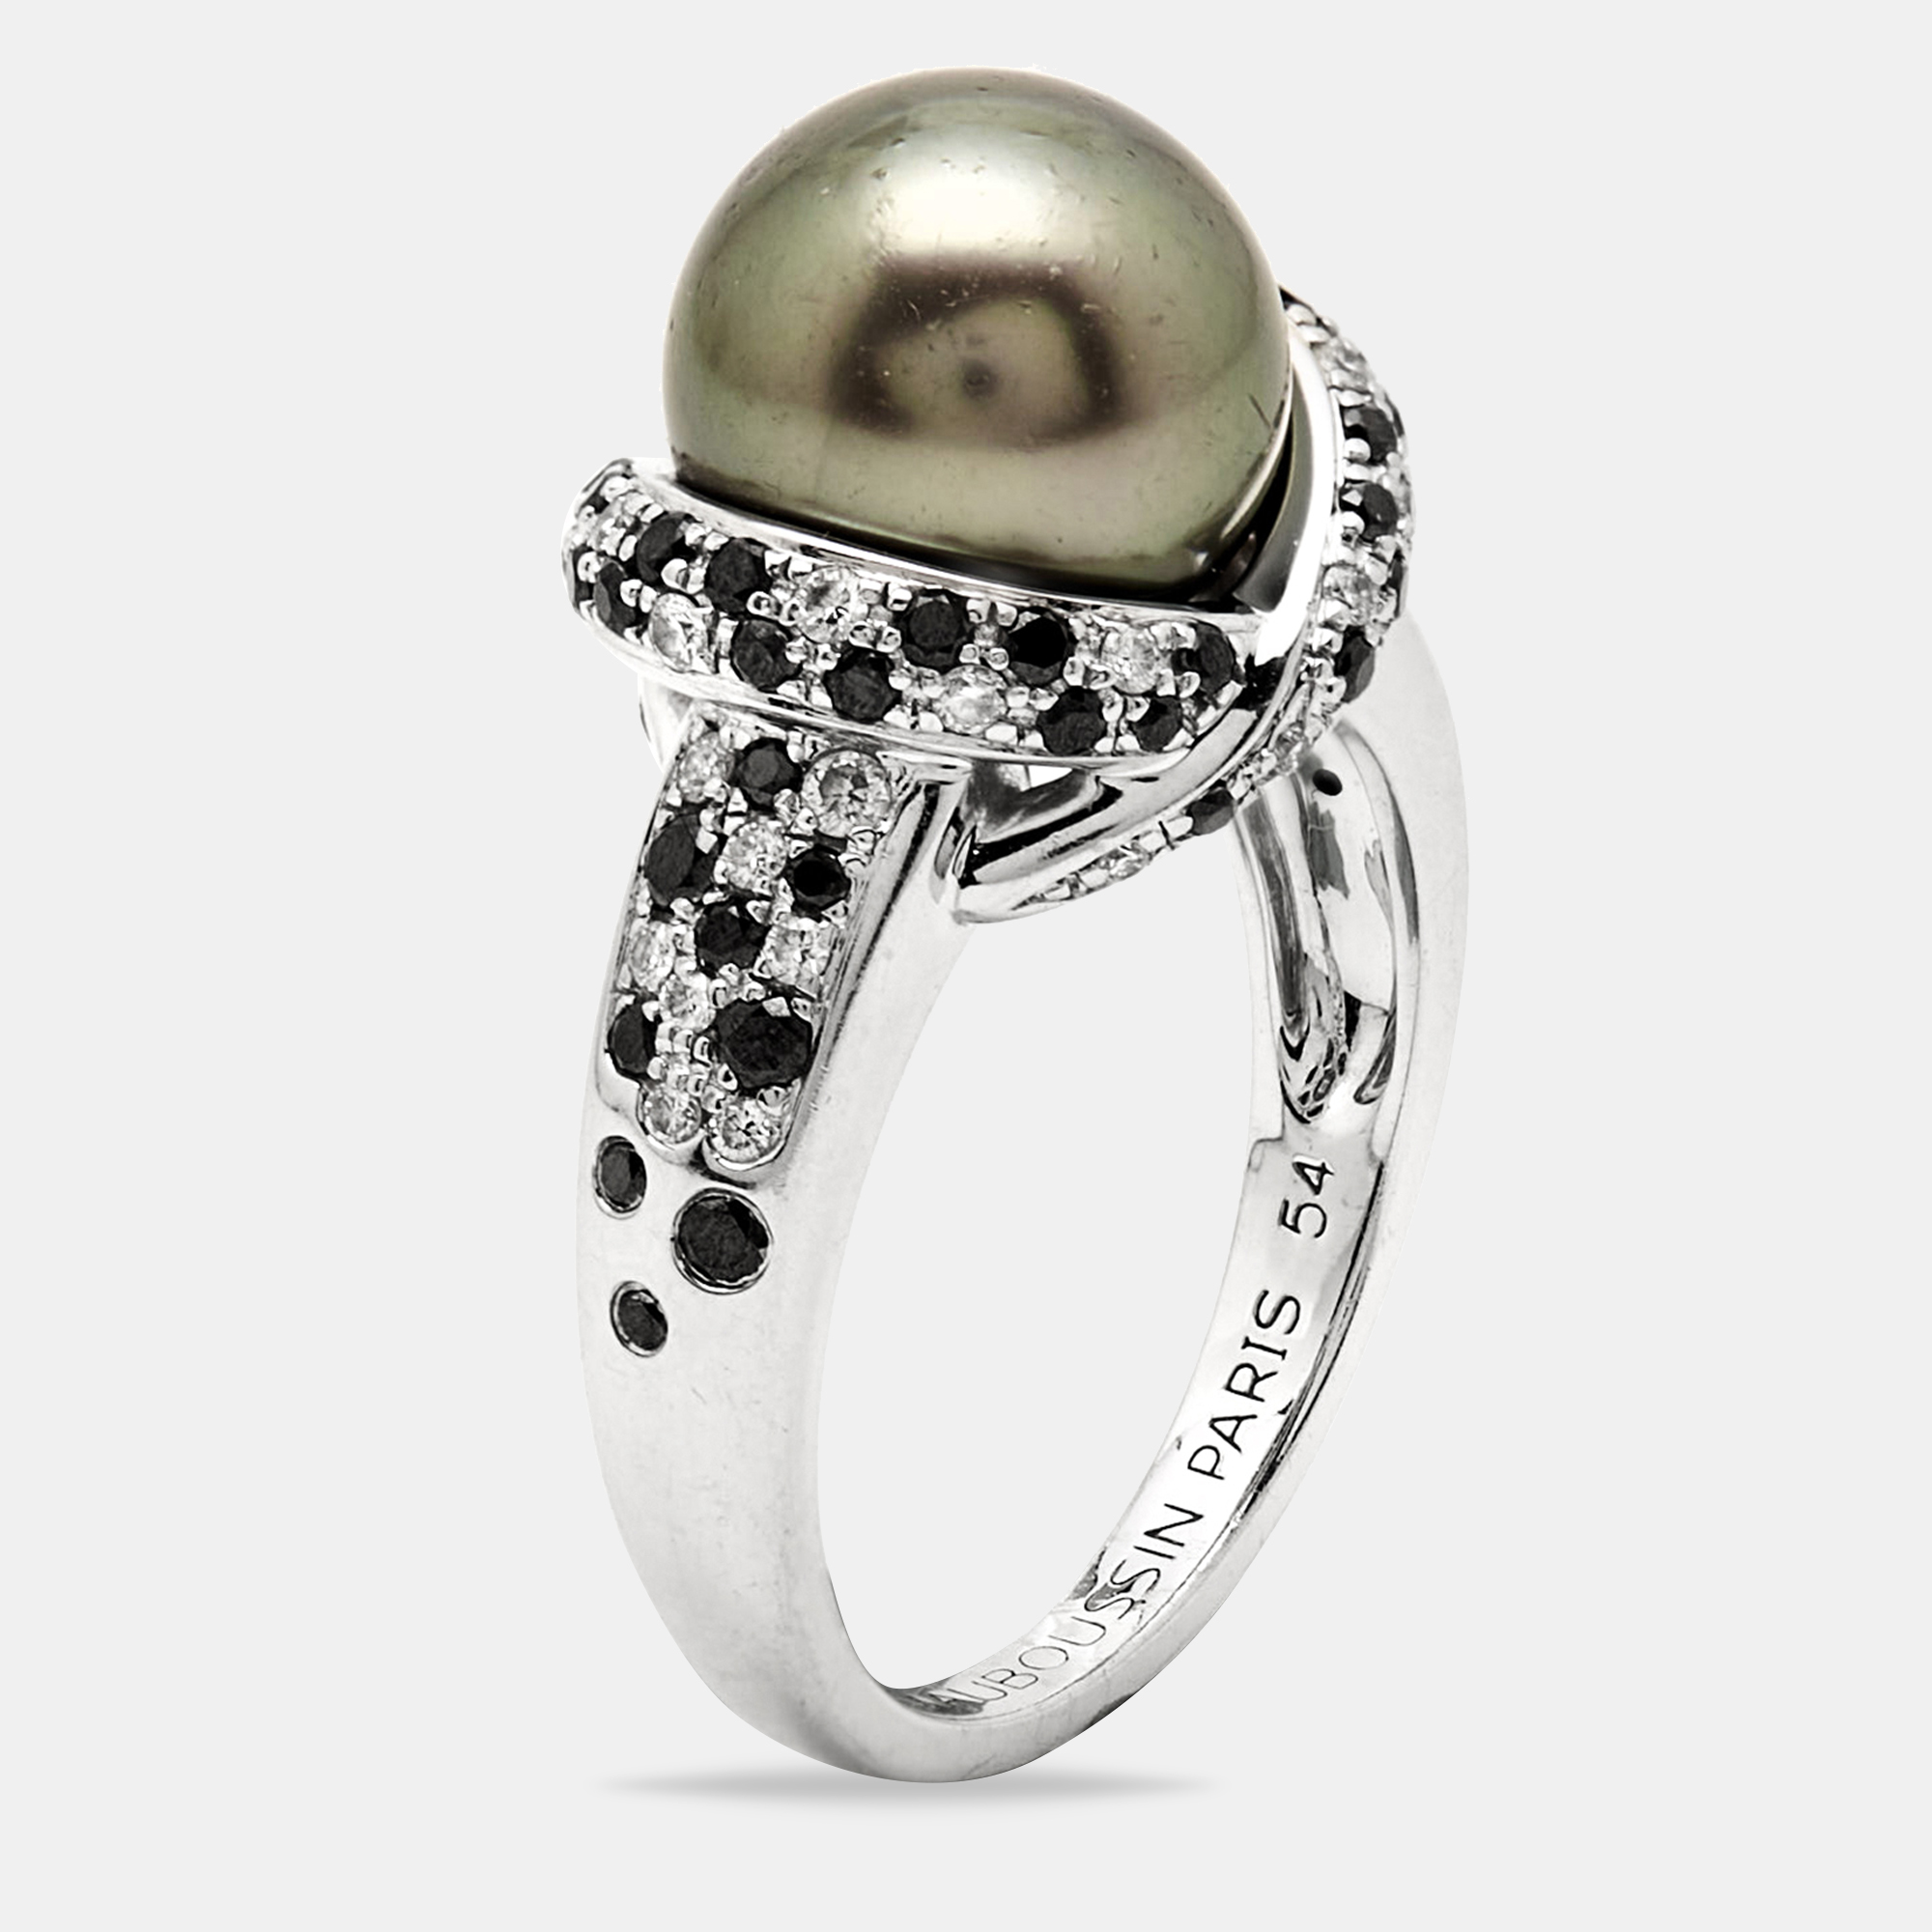 Pre-owned Mauboussin Perle Caviar Mon Amour Cultured Pearl Diamond 18k White Gold Cocktail Ring Size 54